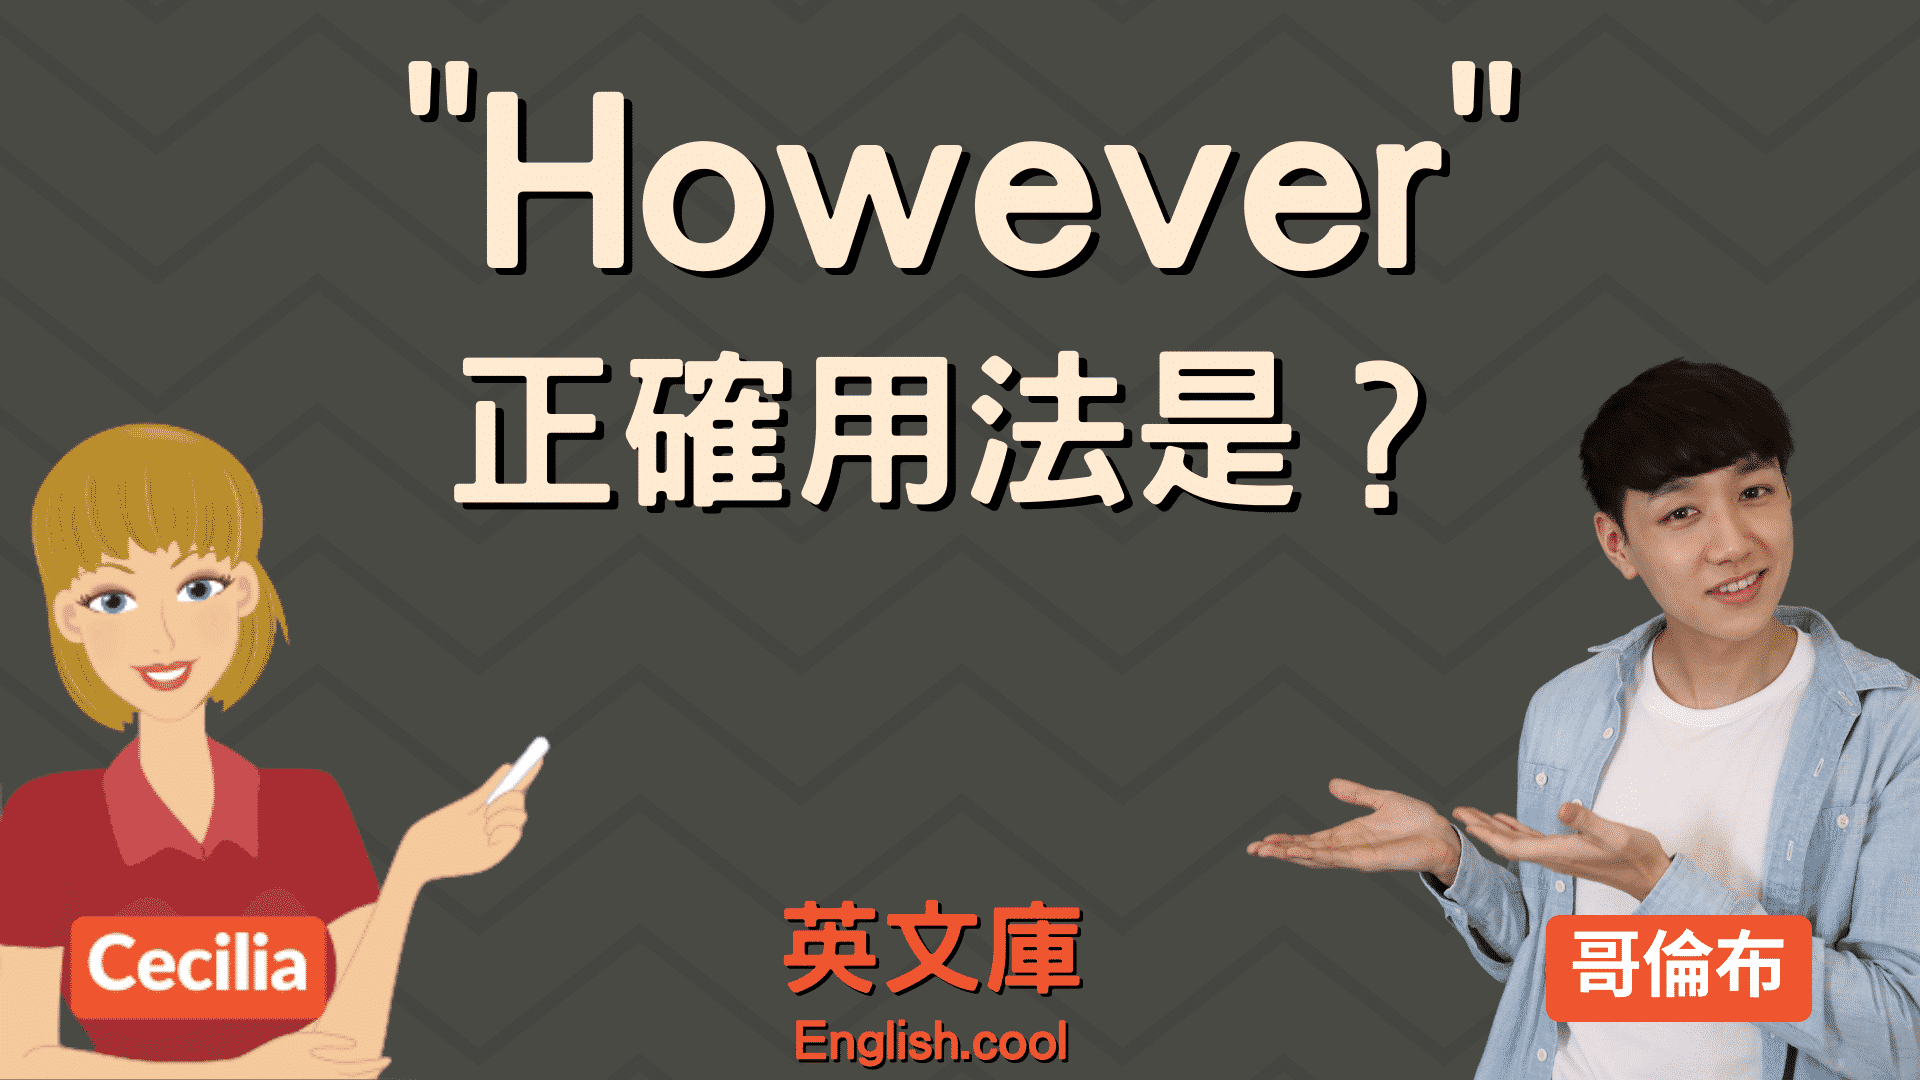 You are currently viewing 「however」正確用法是？來看例句搞懂！